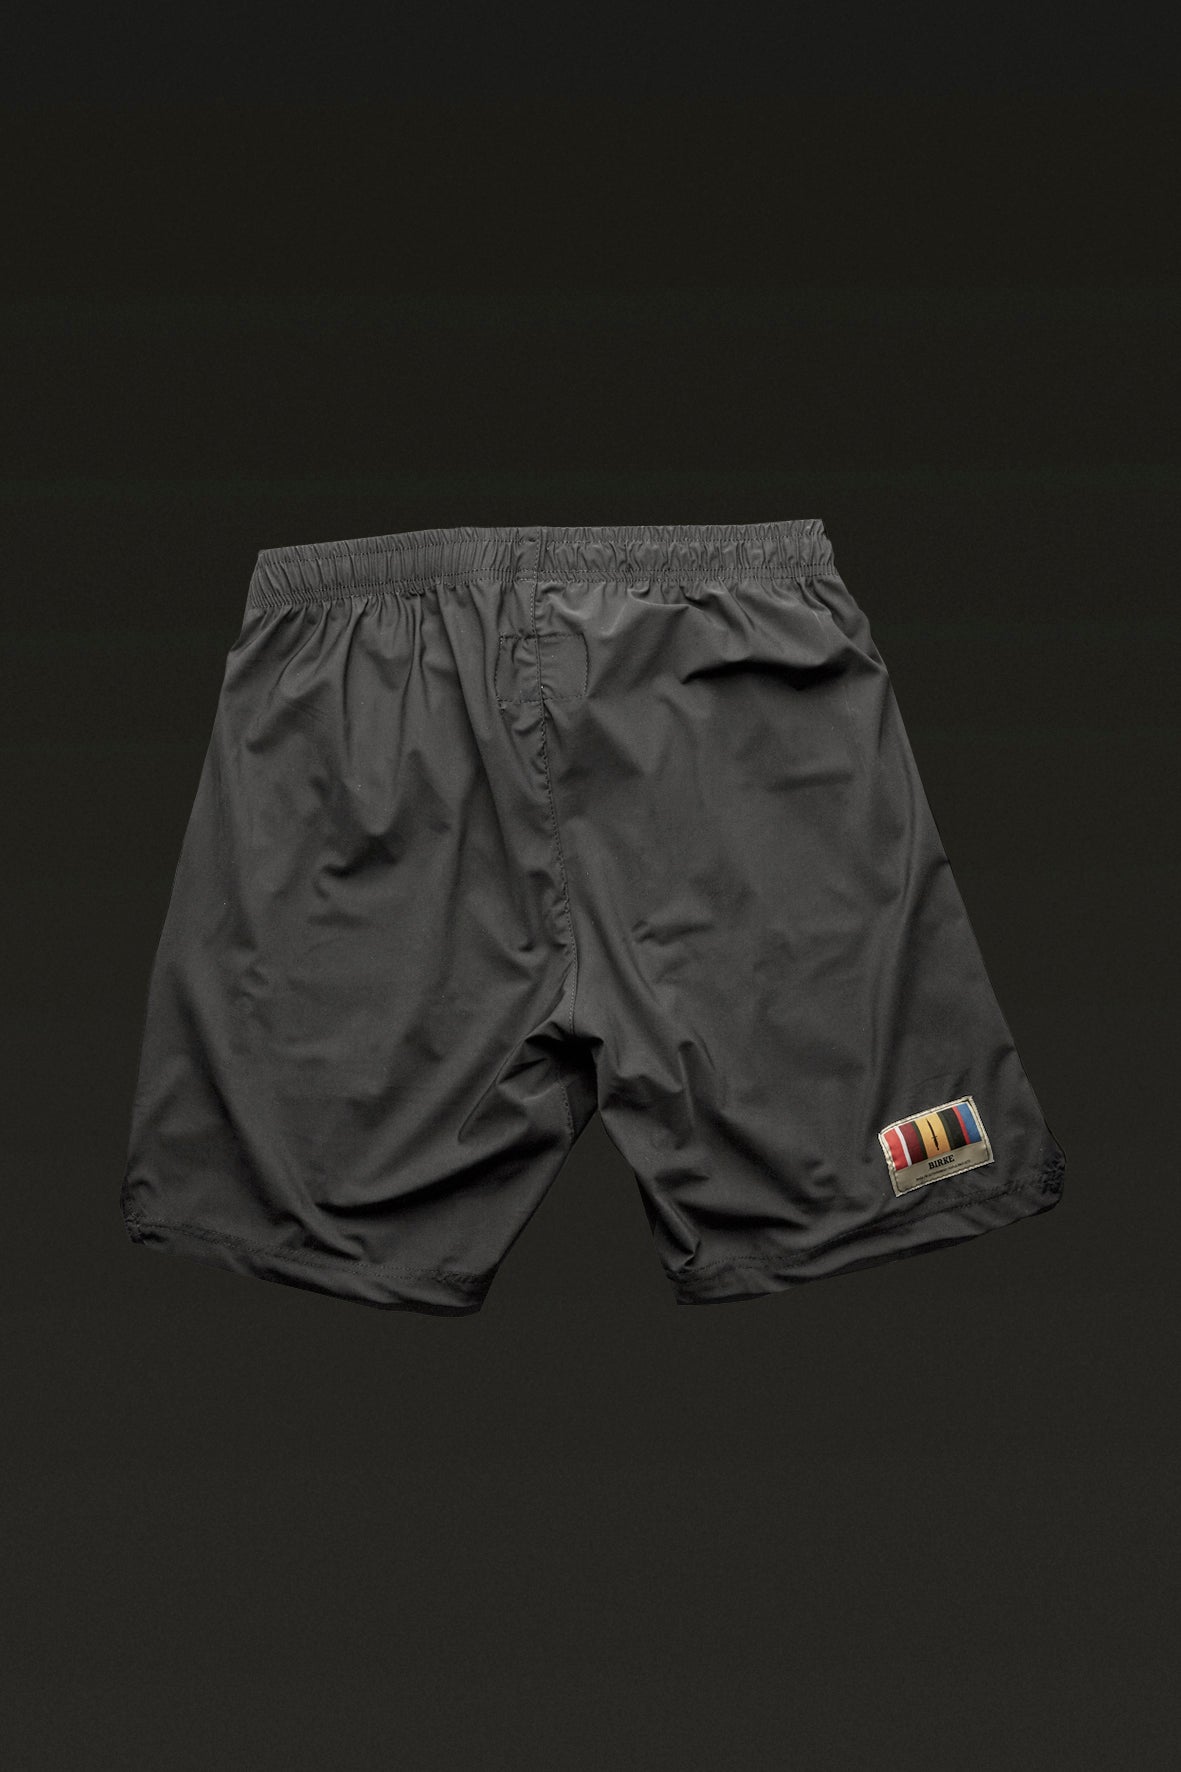 INFILTRATOR SUPER STRETCH SHORTS 7" GRAY